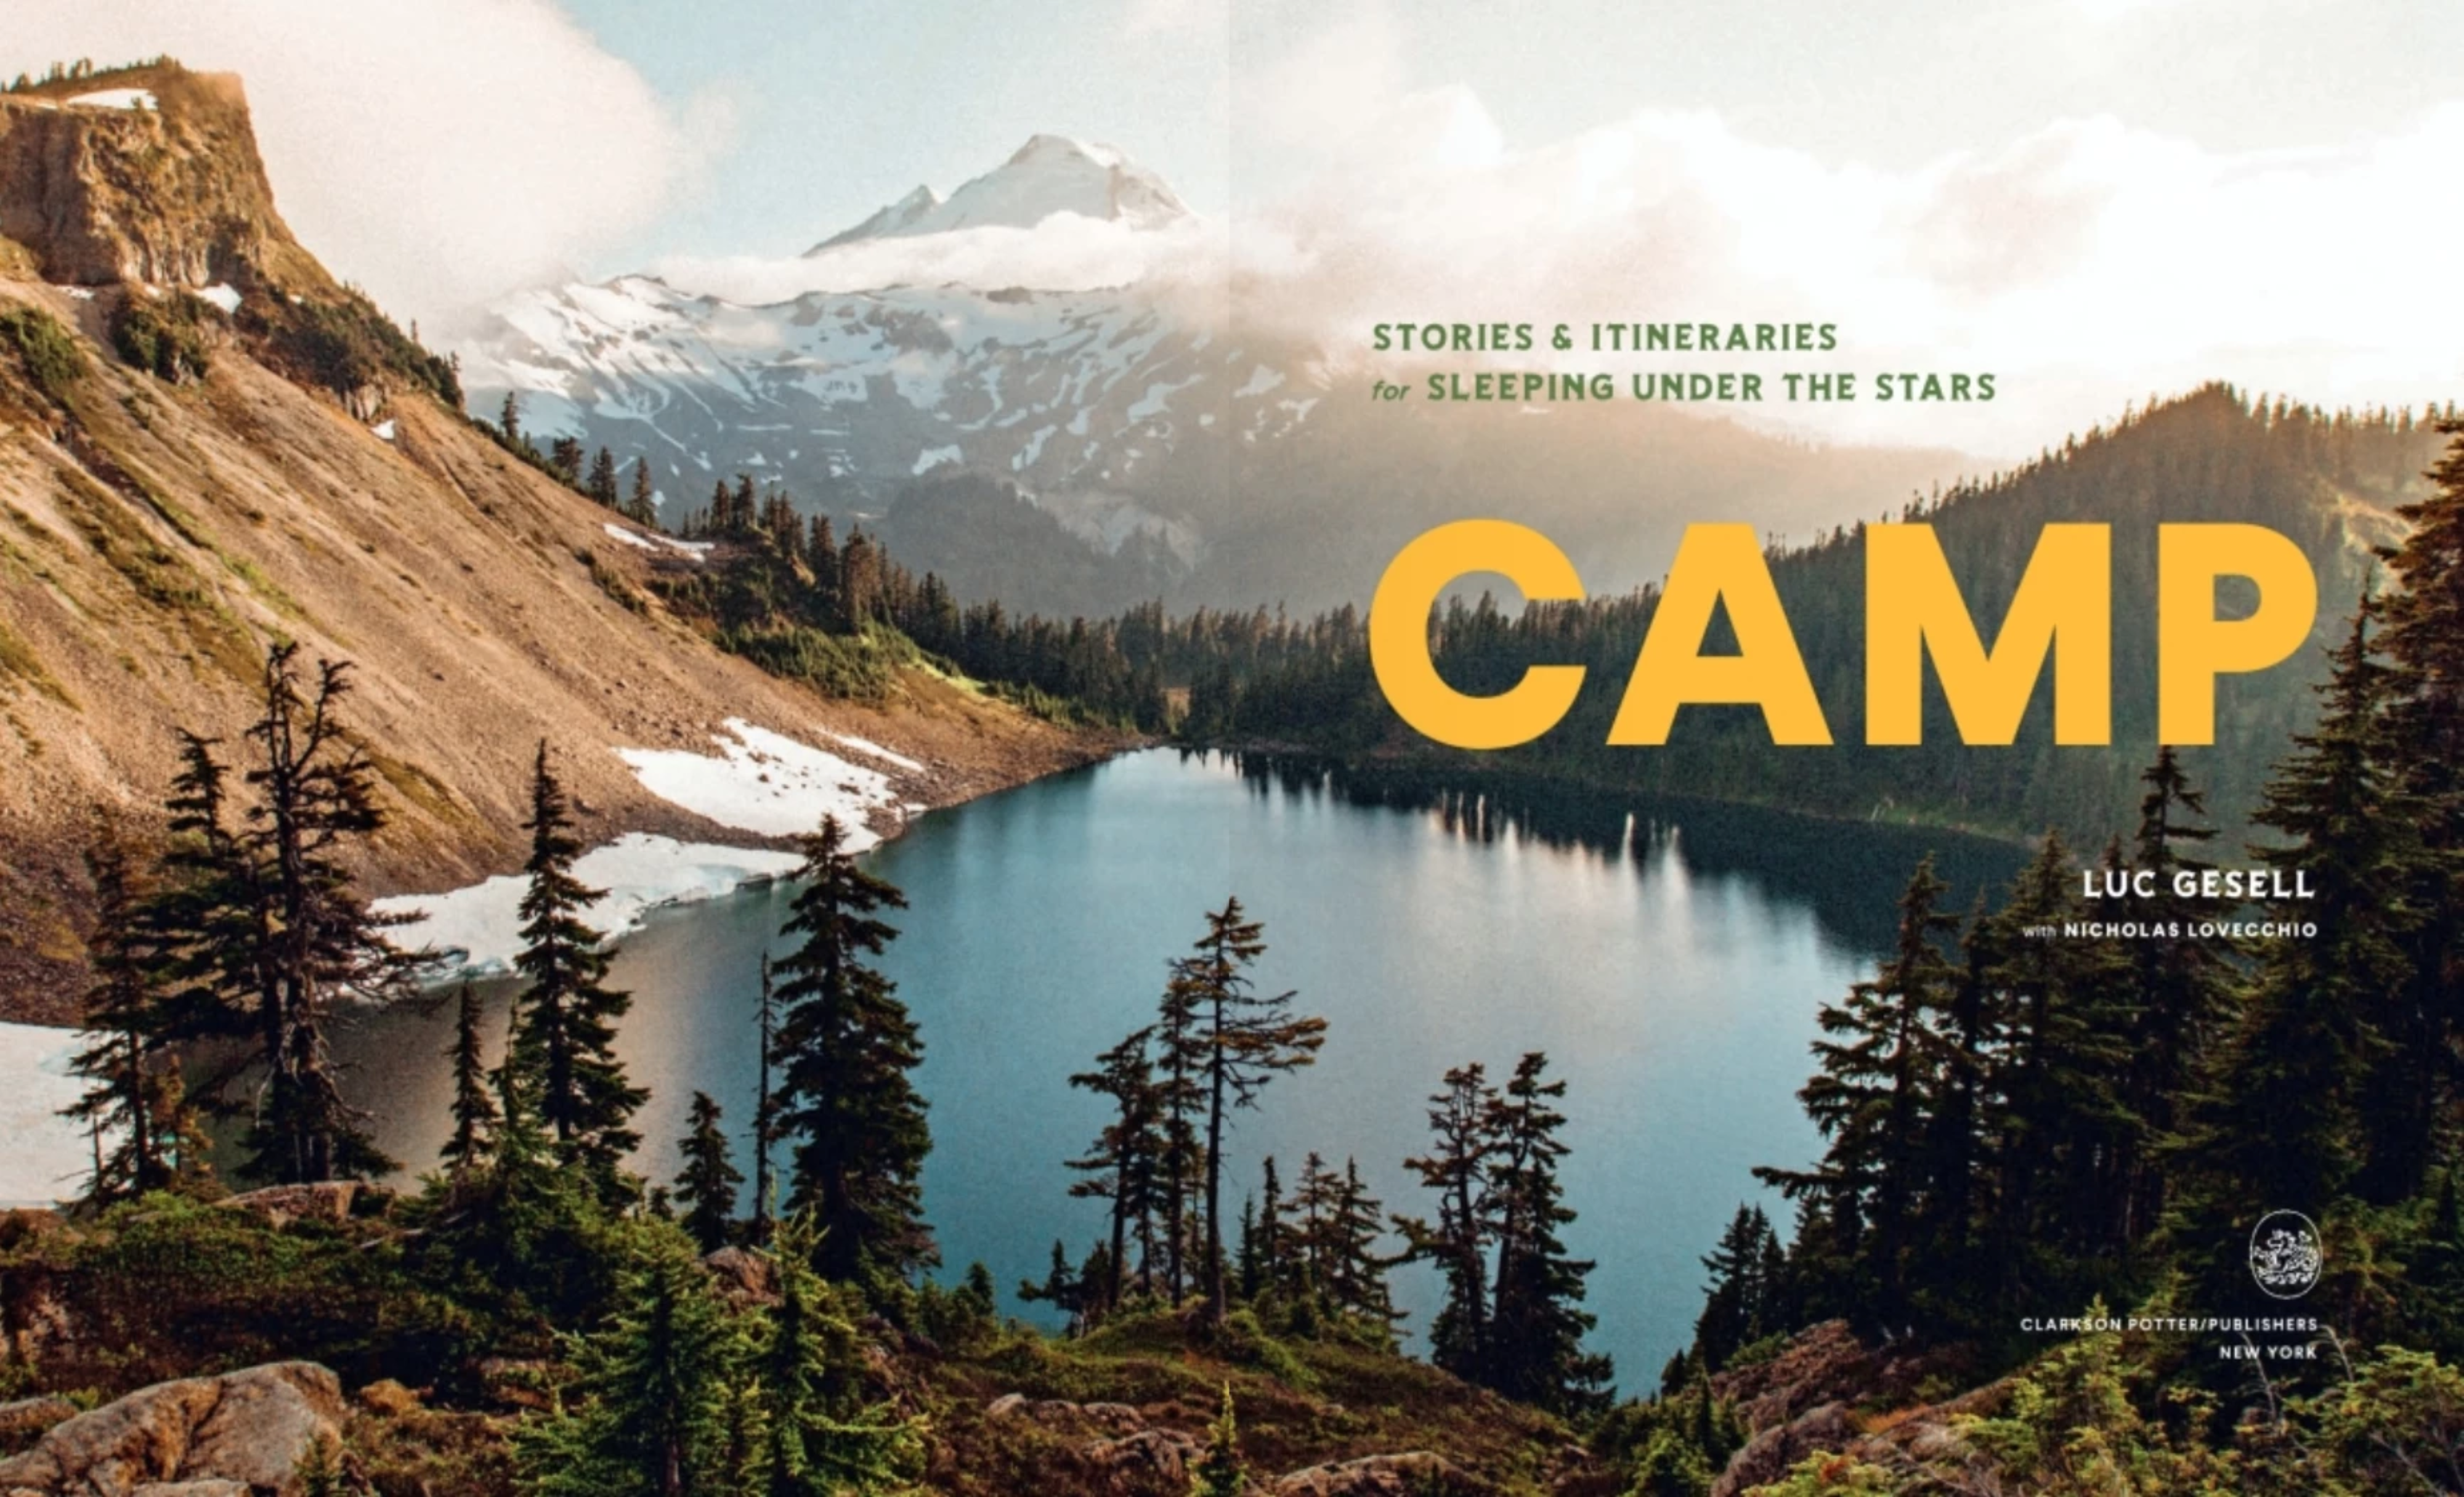 A New Book Explores the Fascinating History of Camping